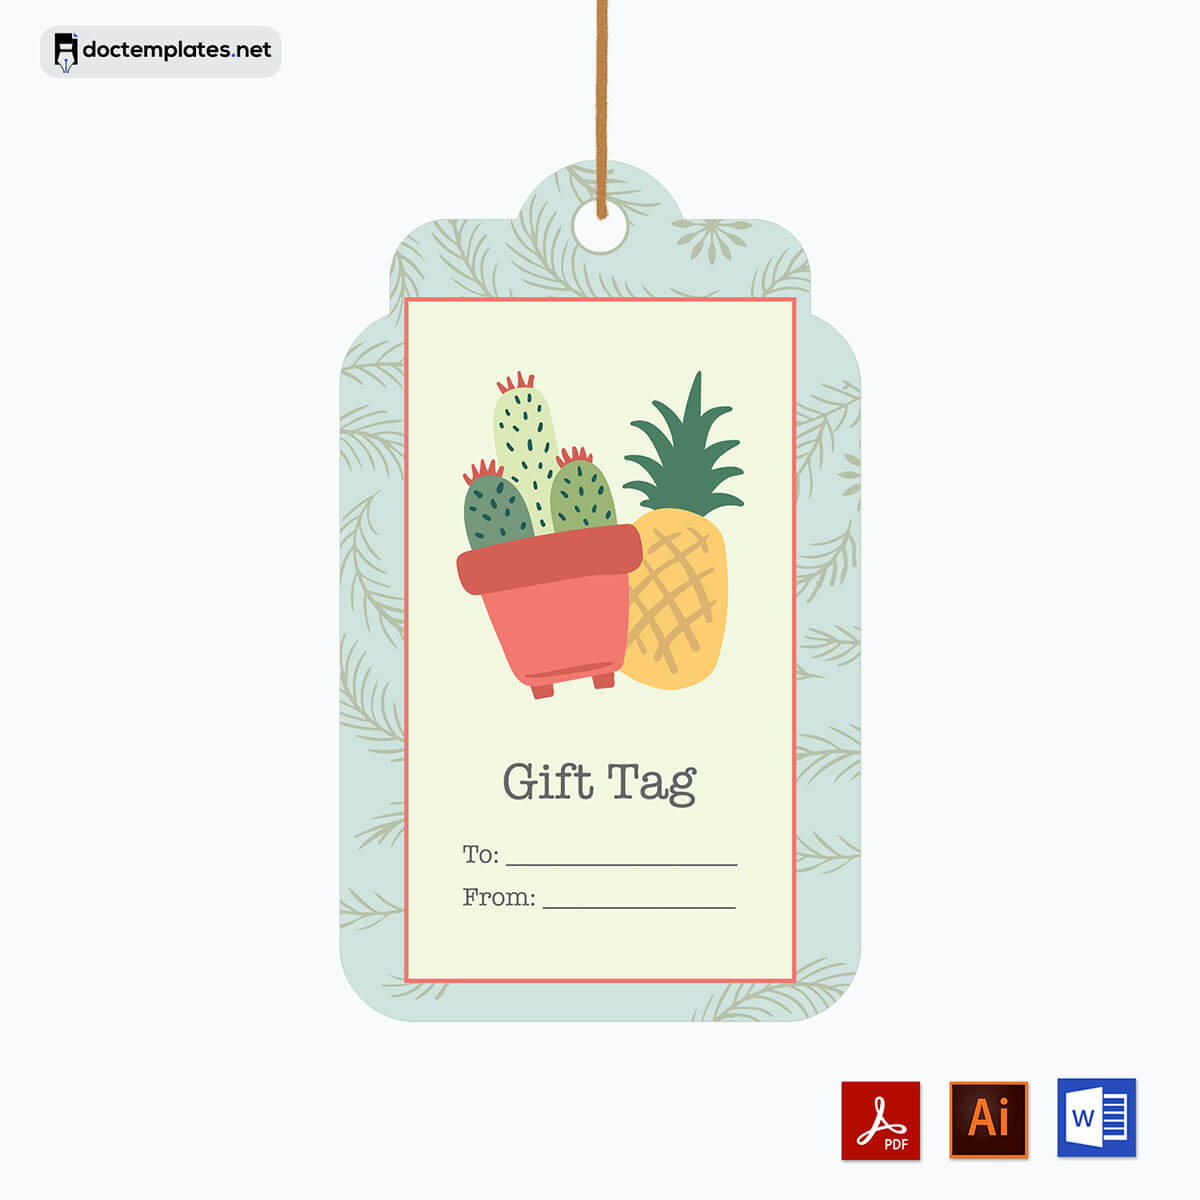 Gift Tag Template Bundle - 30 Editable Designs Included